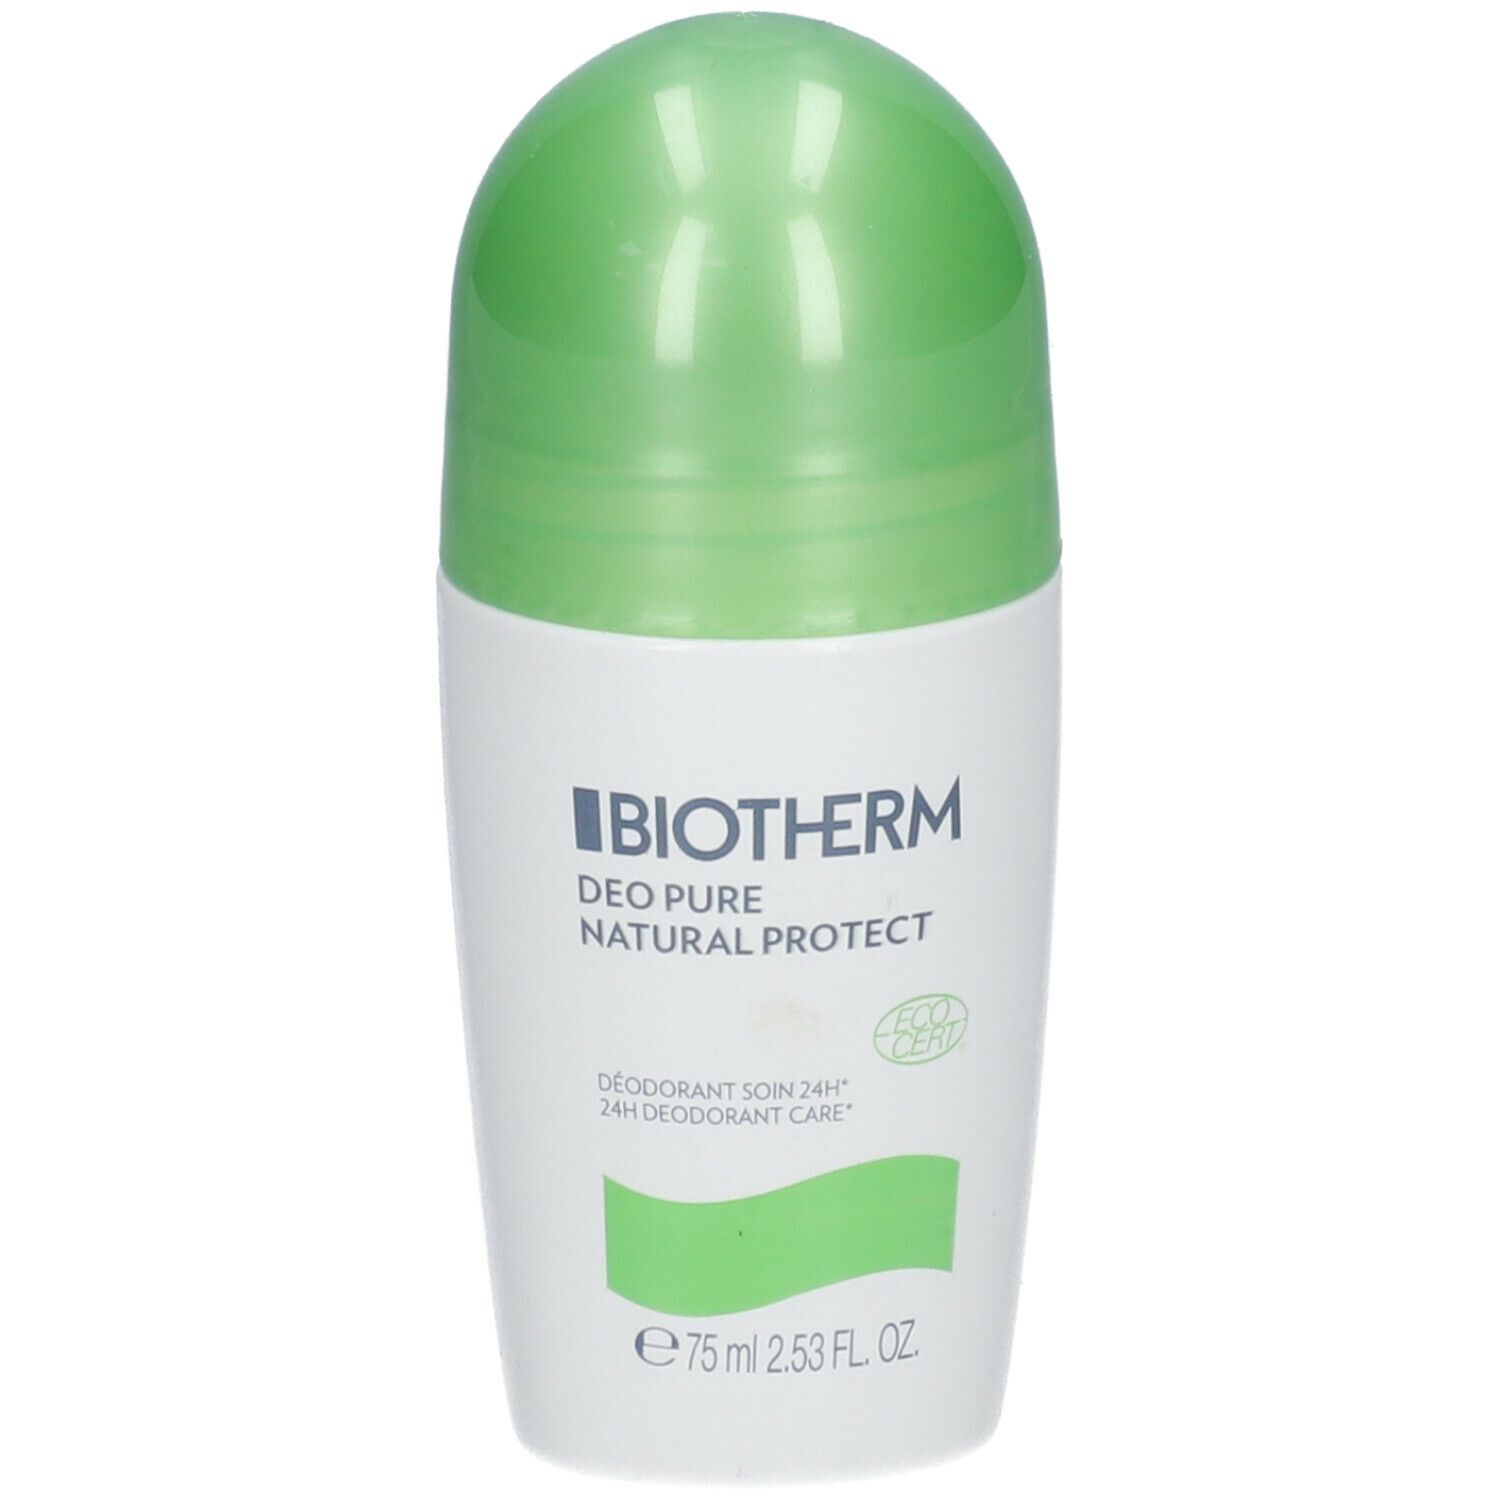 Image of Biotherm Deo Pure Natural Protect